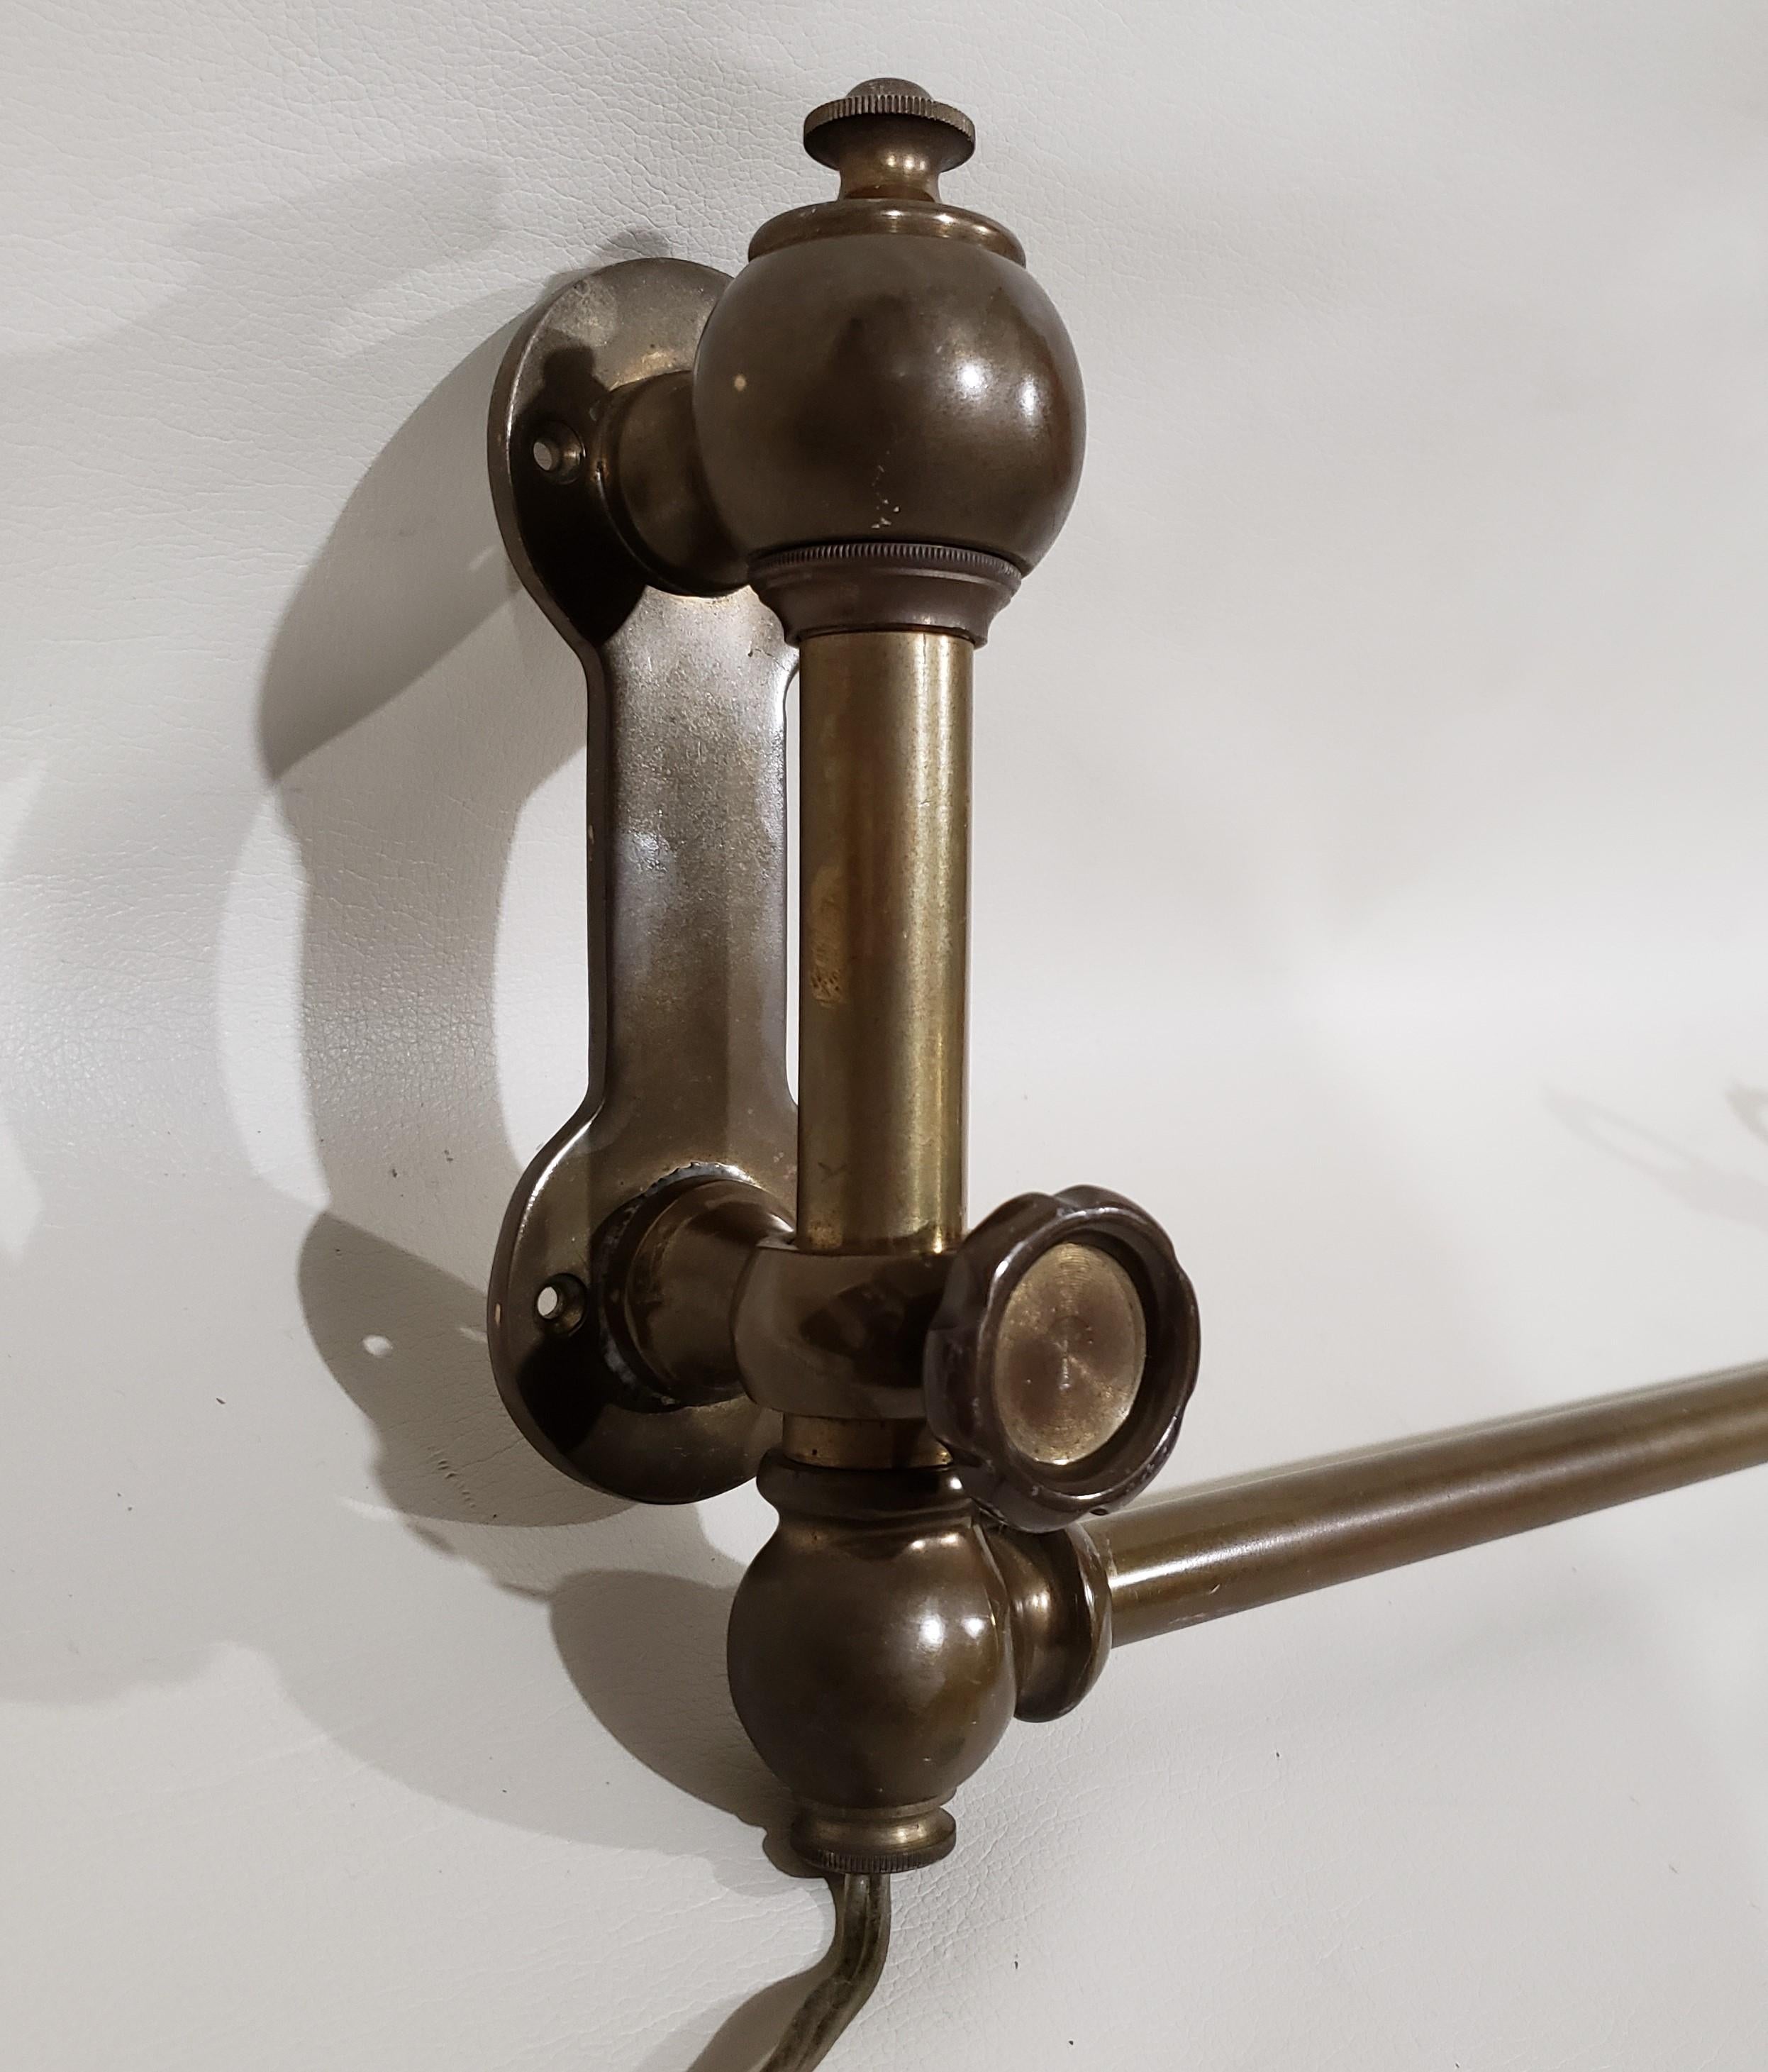 Unique wall mounted light which originally adorned the walls of a train. This brass light with a beautiful rich patina easily extends and adjusts to a multitude of positions.